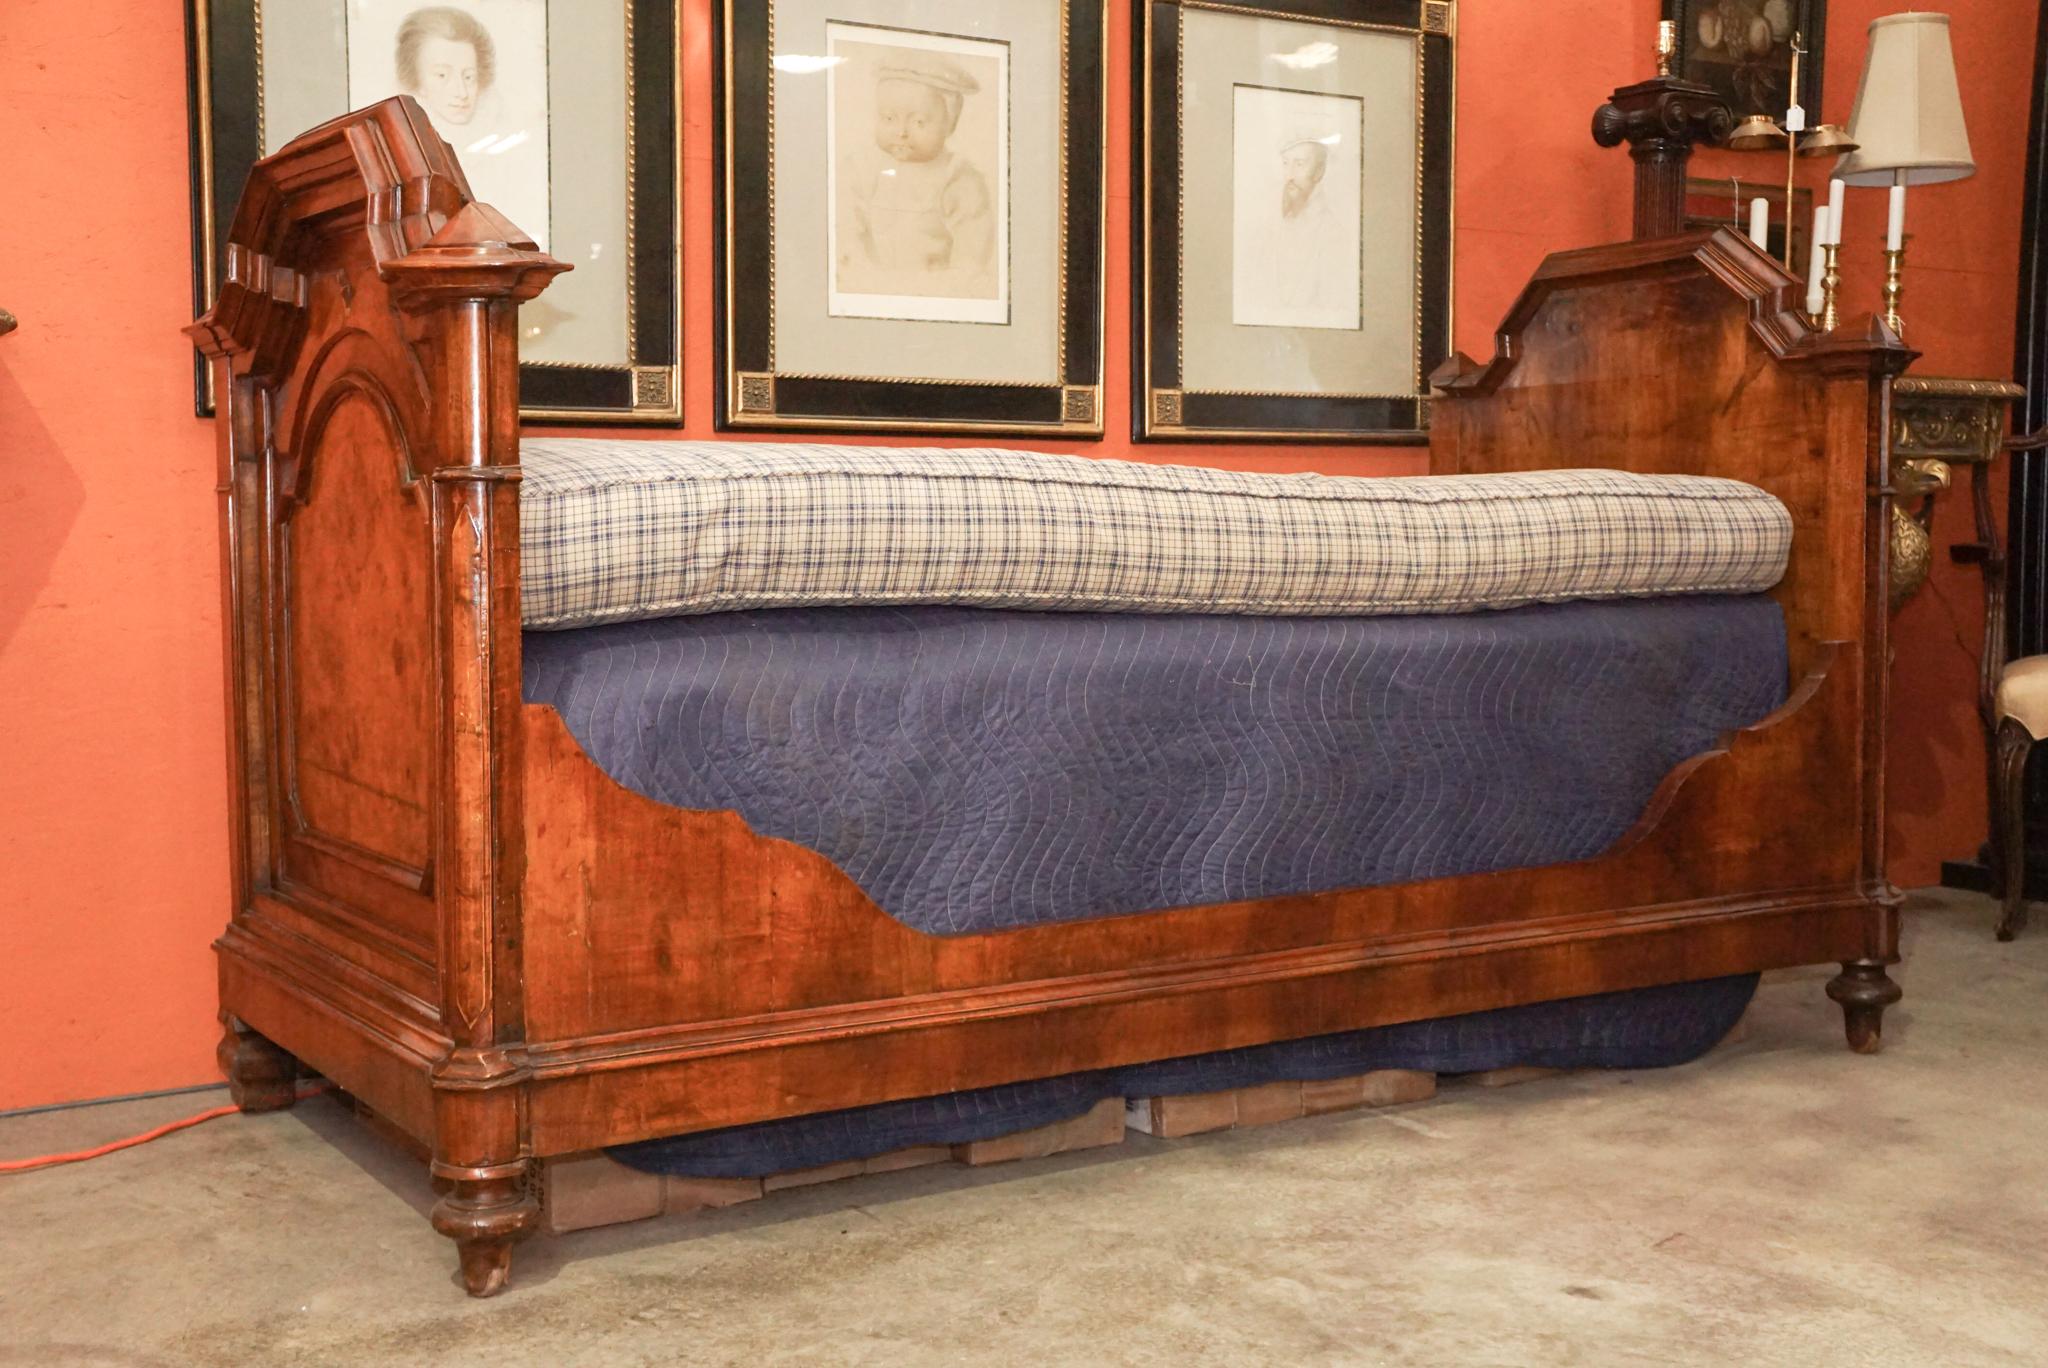 This daybed or sofa was made originally in France circa 1870 in the Napoleon III style and is constructed of walnut and burled walnut veneers used to dramatically show off the wood selection and grain patterns. Large profiles and massive flat or